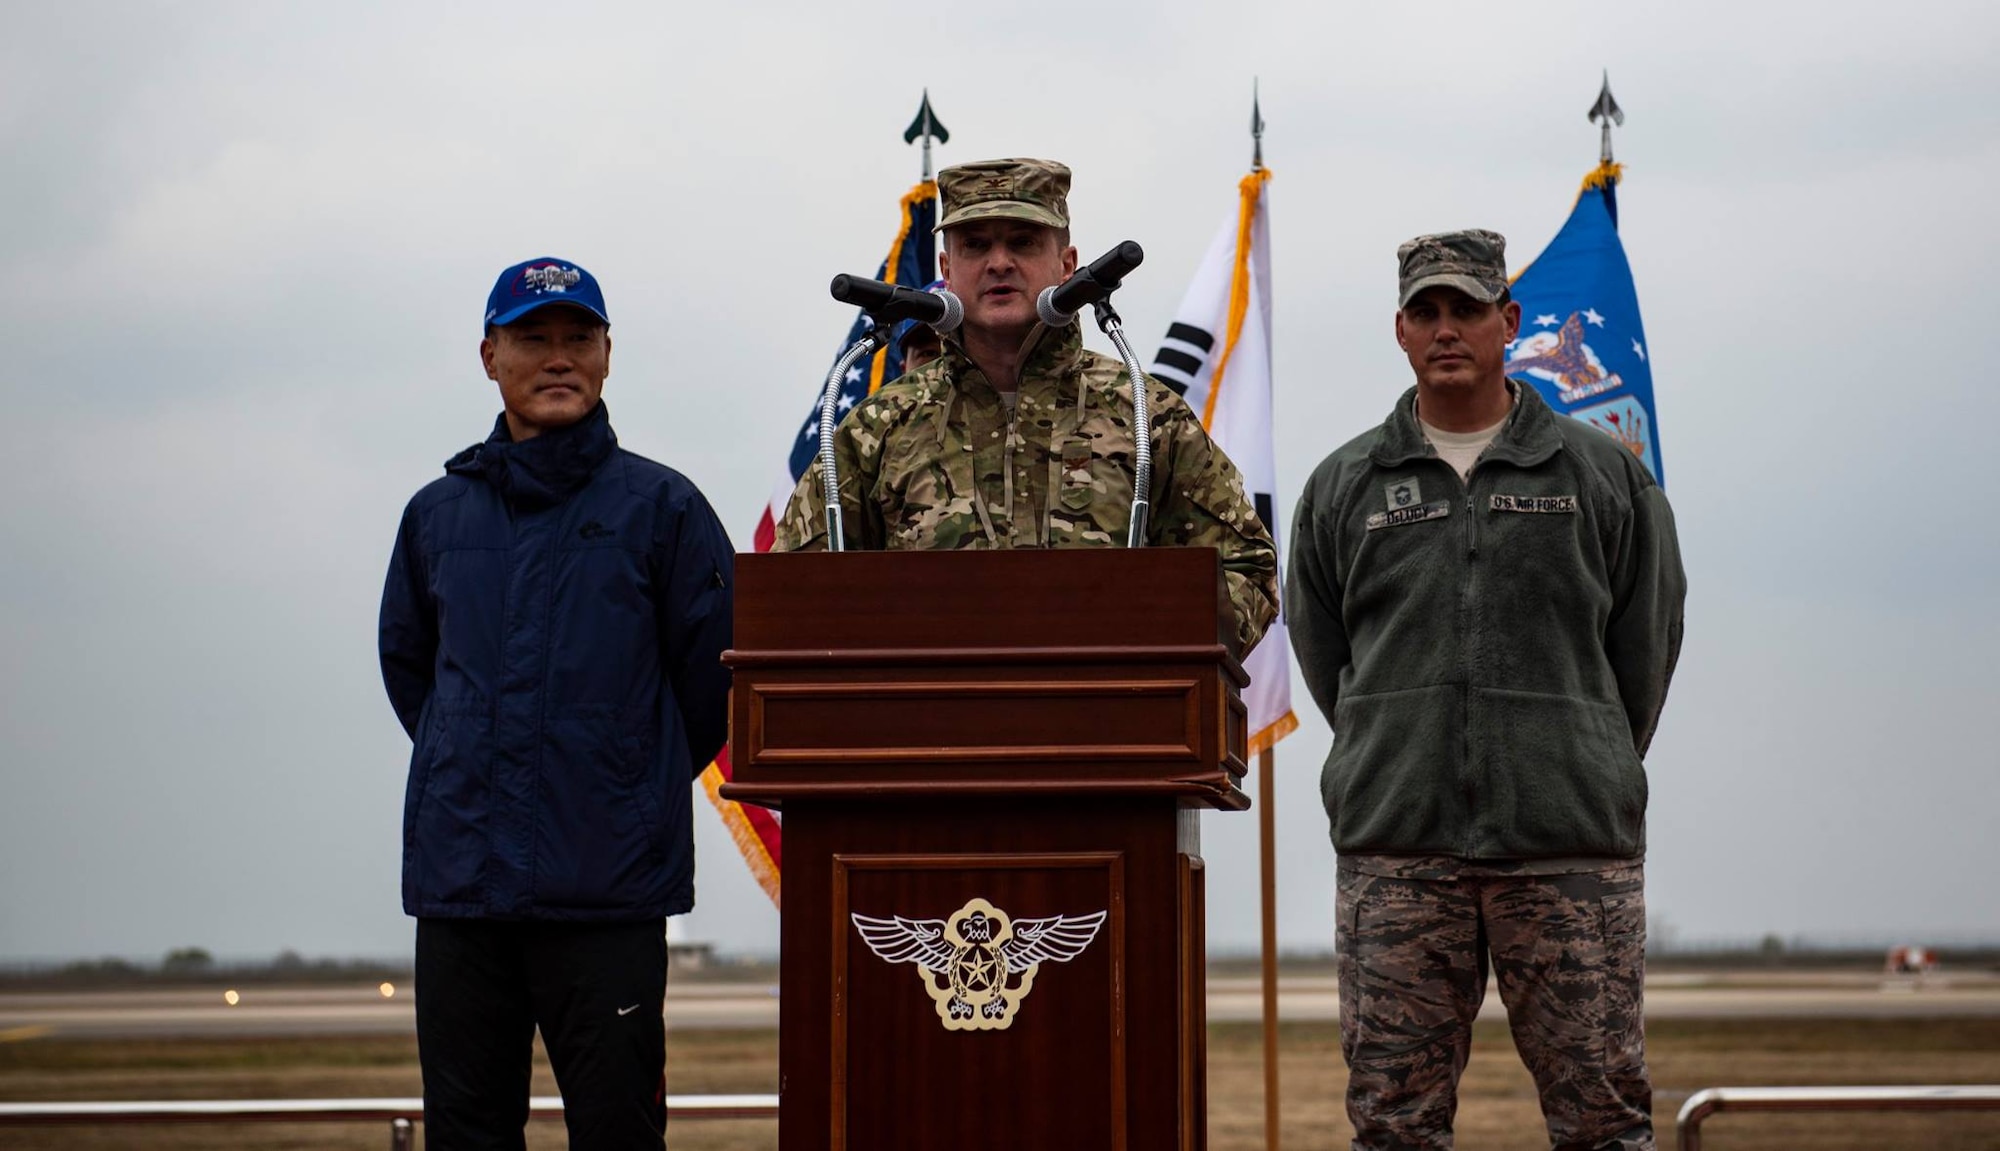 Col. John Bosone, 8th Fighter Wing commander, gives opening remarks for the 2018 US-ROKAF Friendship Day at Kunsan Air Base, Republic of Korea, Nov. 9, 2018. The US-ROKAF Friendship Day focused on celebrating the partnership and alliance between the 8th FW and 38th FG, who participated in several sporting events and competitions throughout the day. (U.S. Air Force photo by Senior Airman Stefan Alvarez)